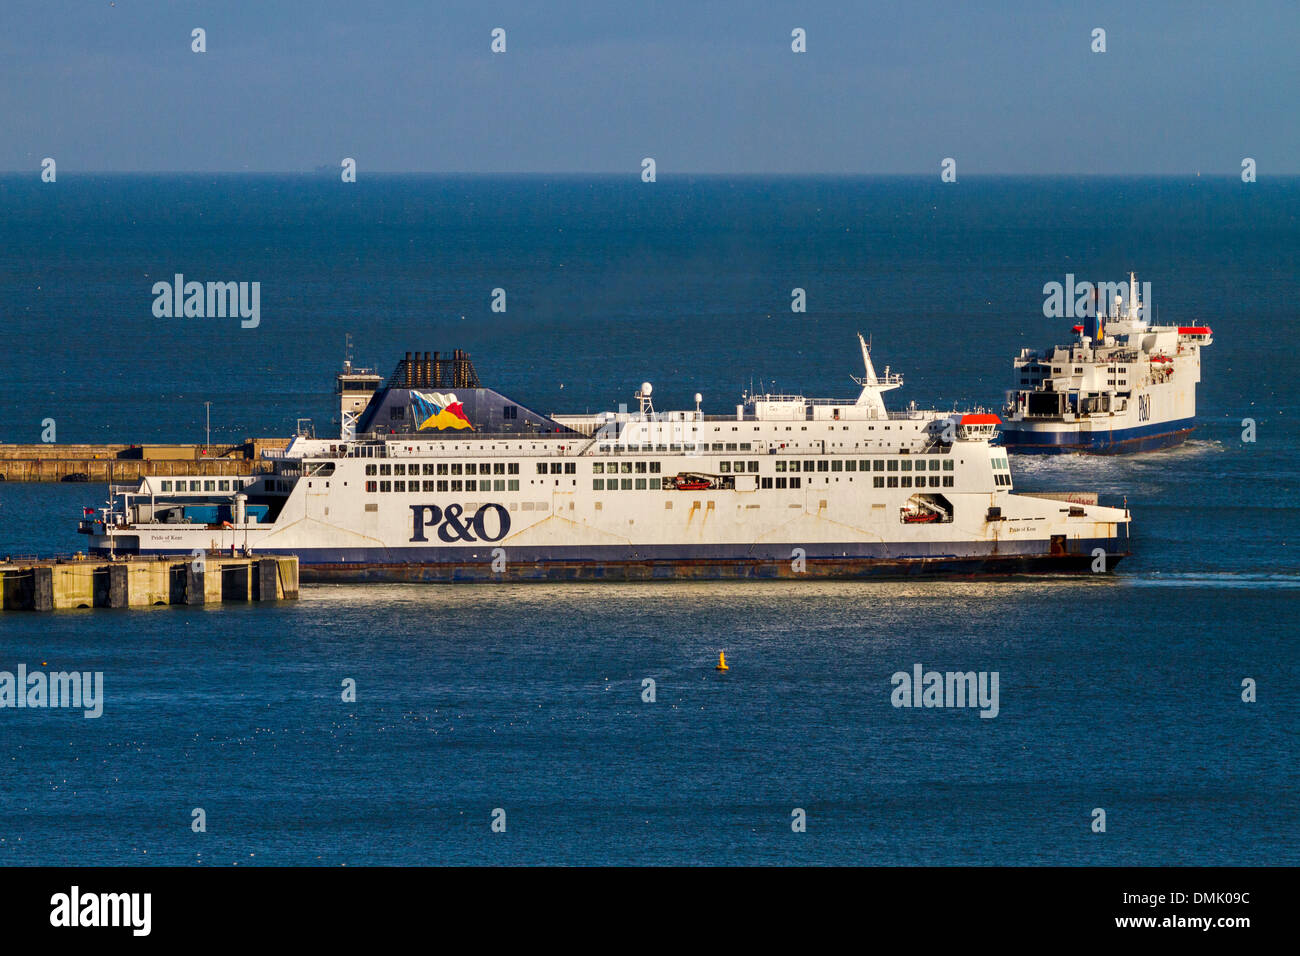 P&O ferry boats maneuver at the Port of Dover Ferry Terminal, Kent, UK Stock Photo